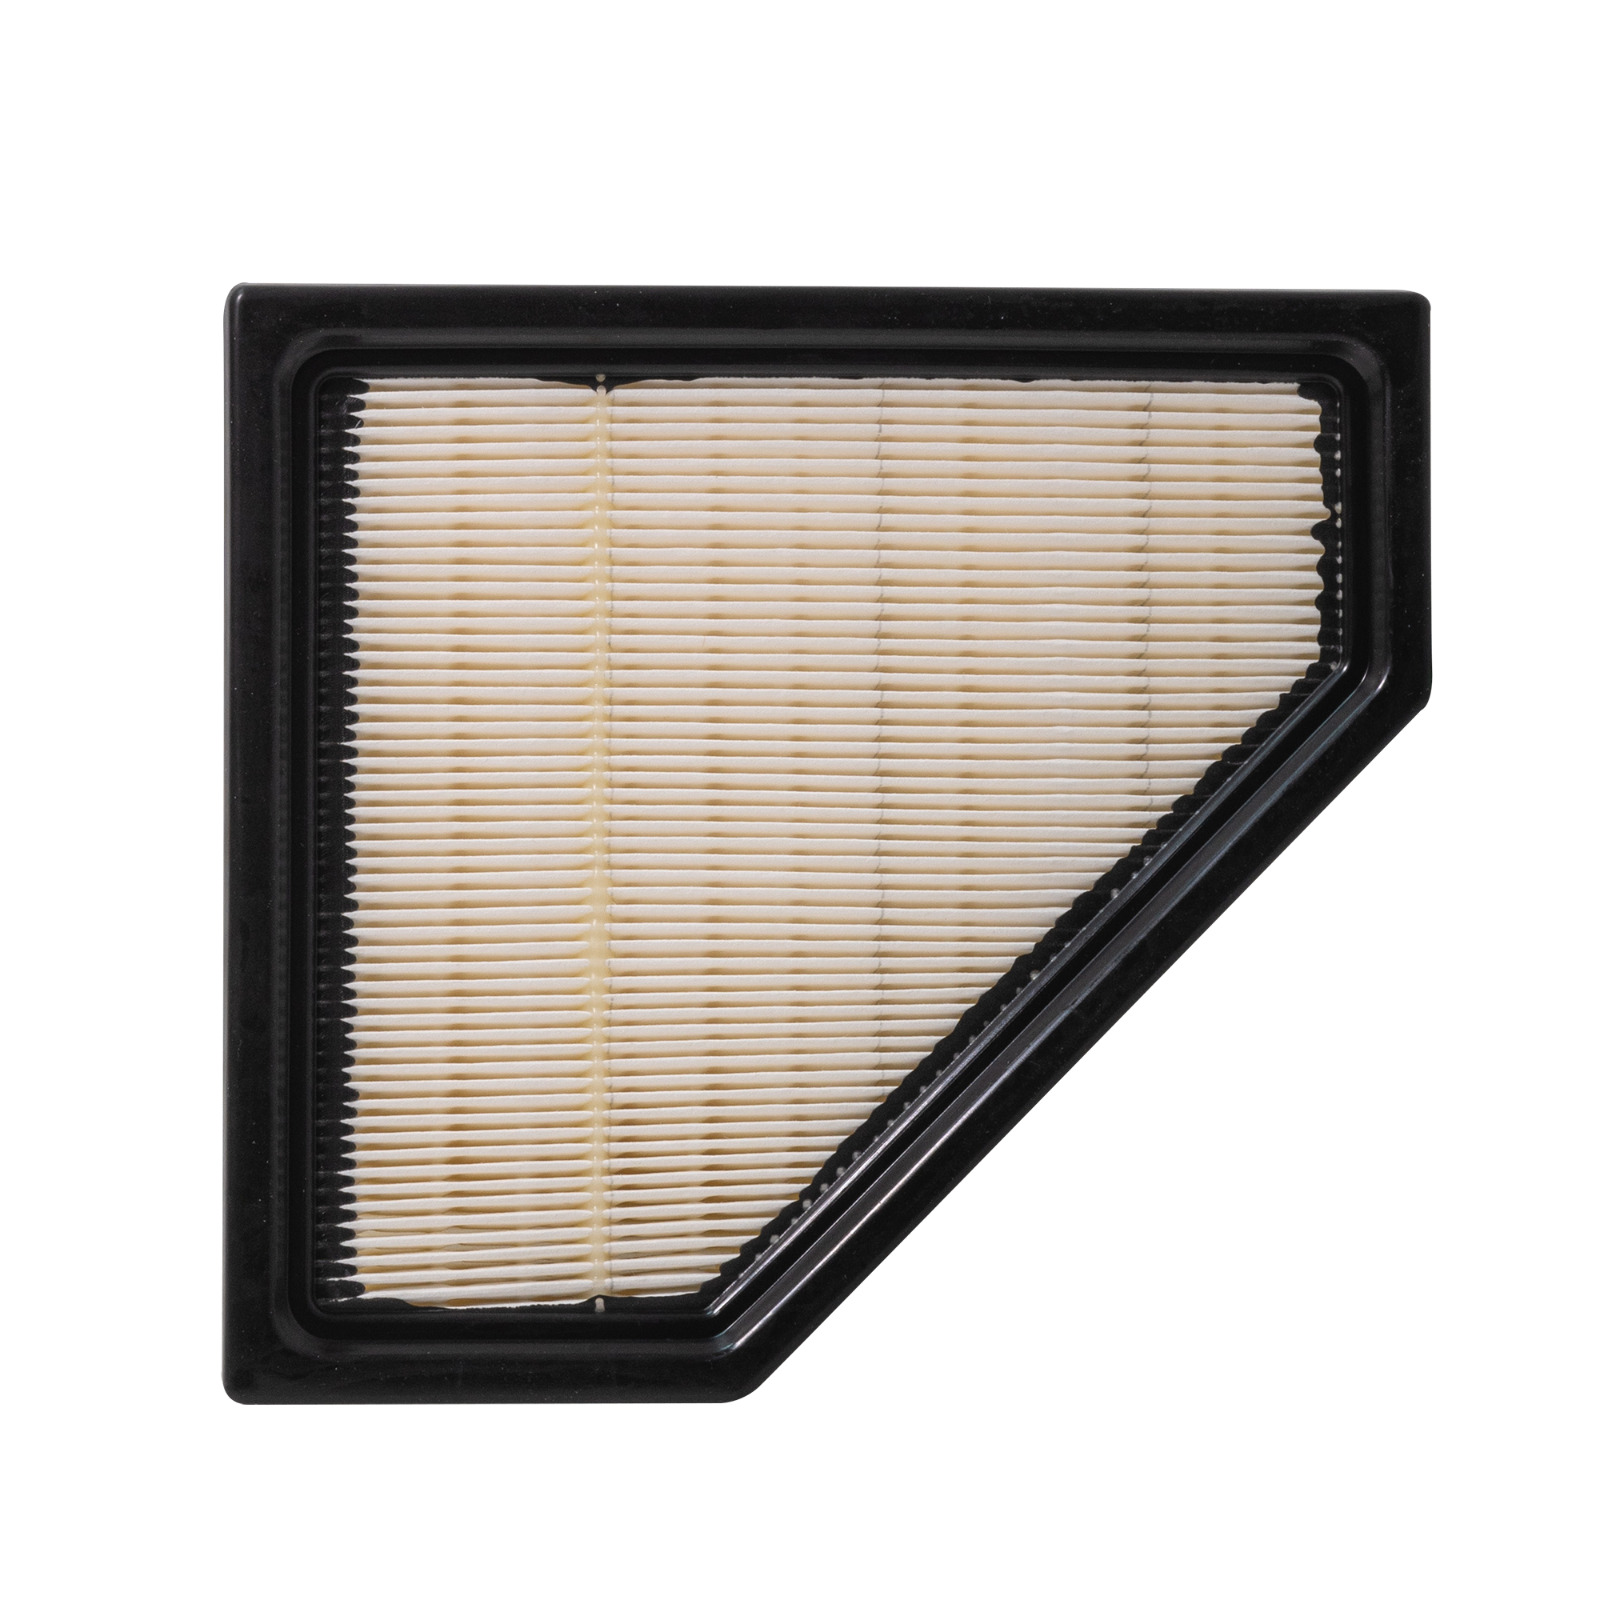 Marvel Engine Air Filter MRA1890 (A3150C) for Ford Focus 2008-2011 2.0L